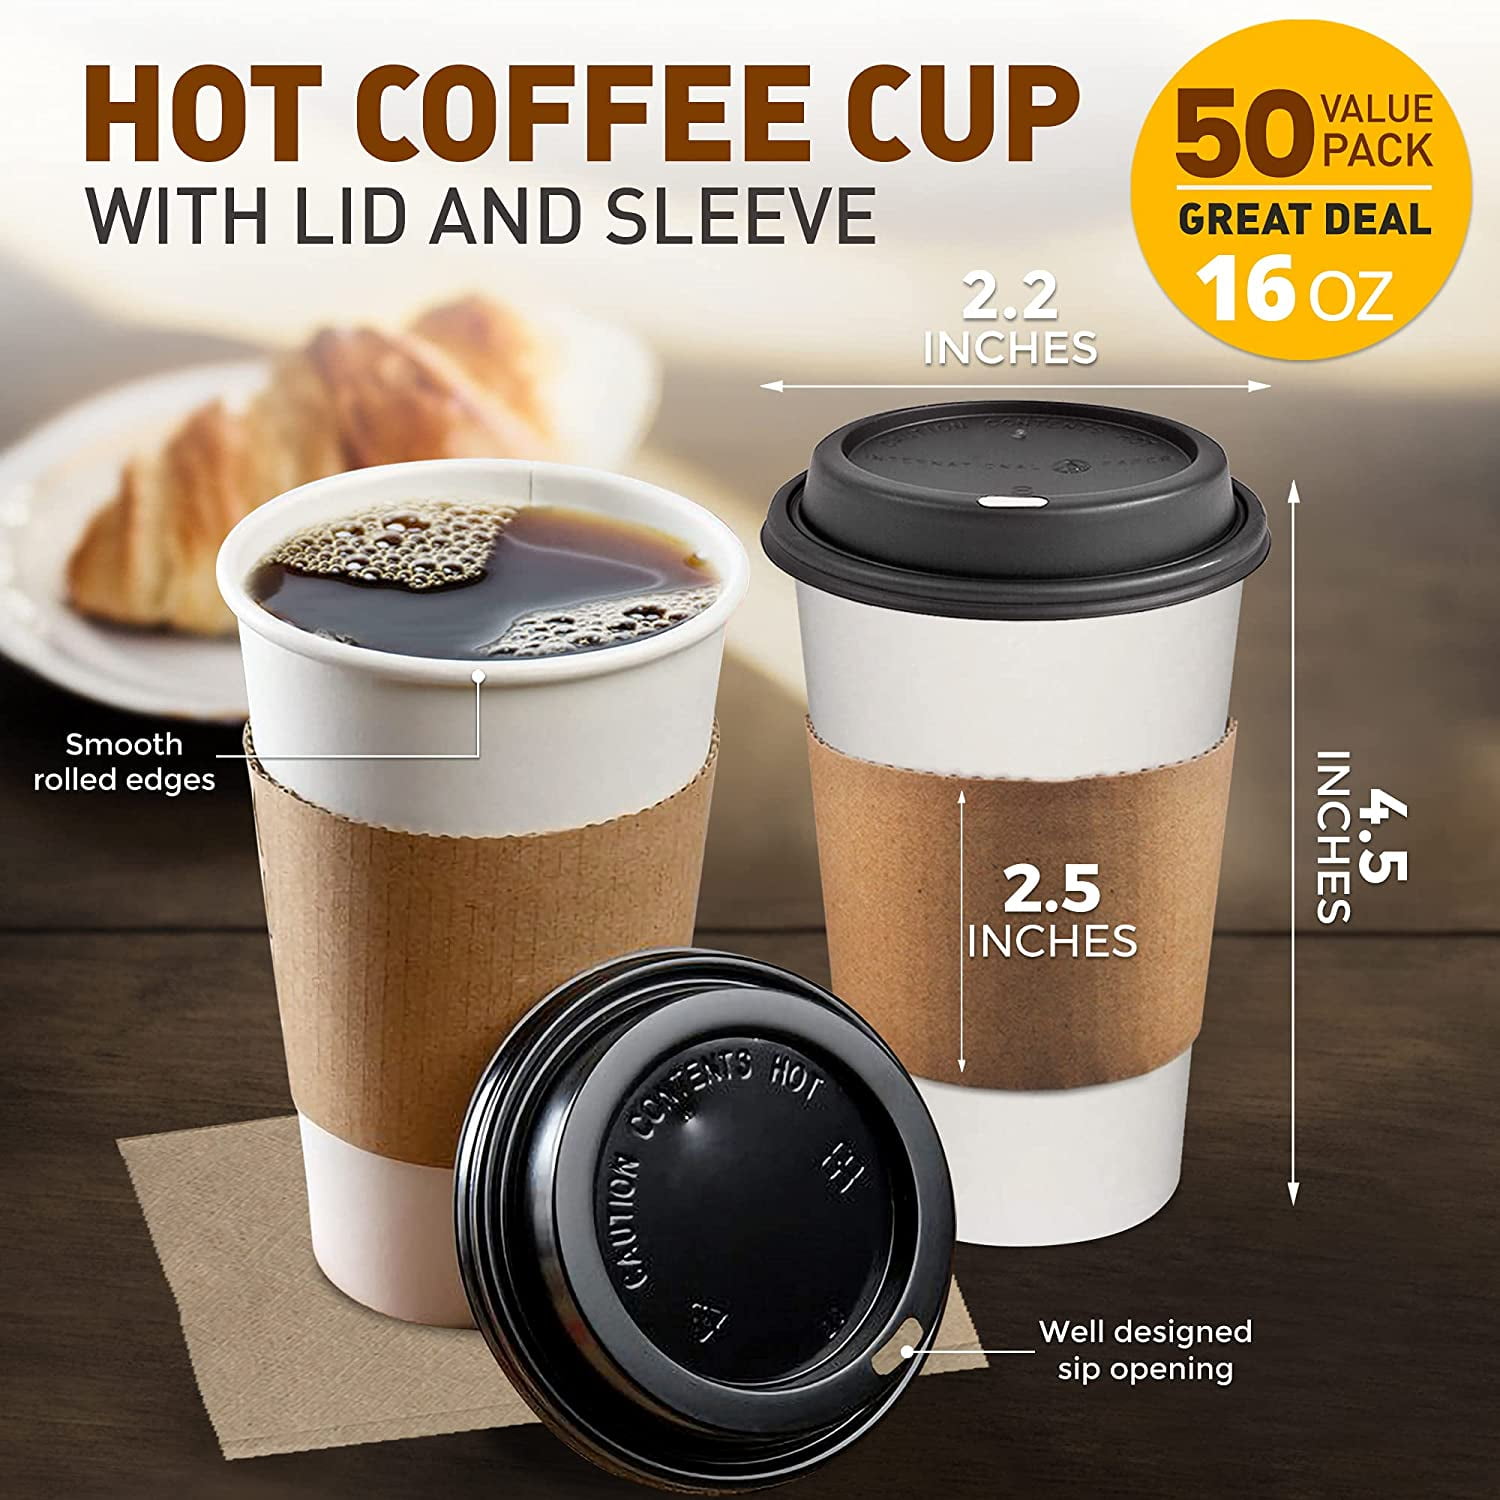 16oz White Paper Coffee Cups BUNDLE with White LIDS and SLEEVES Full Set 